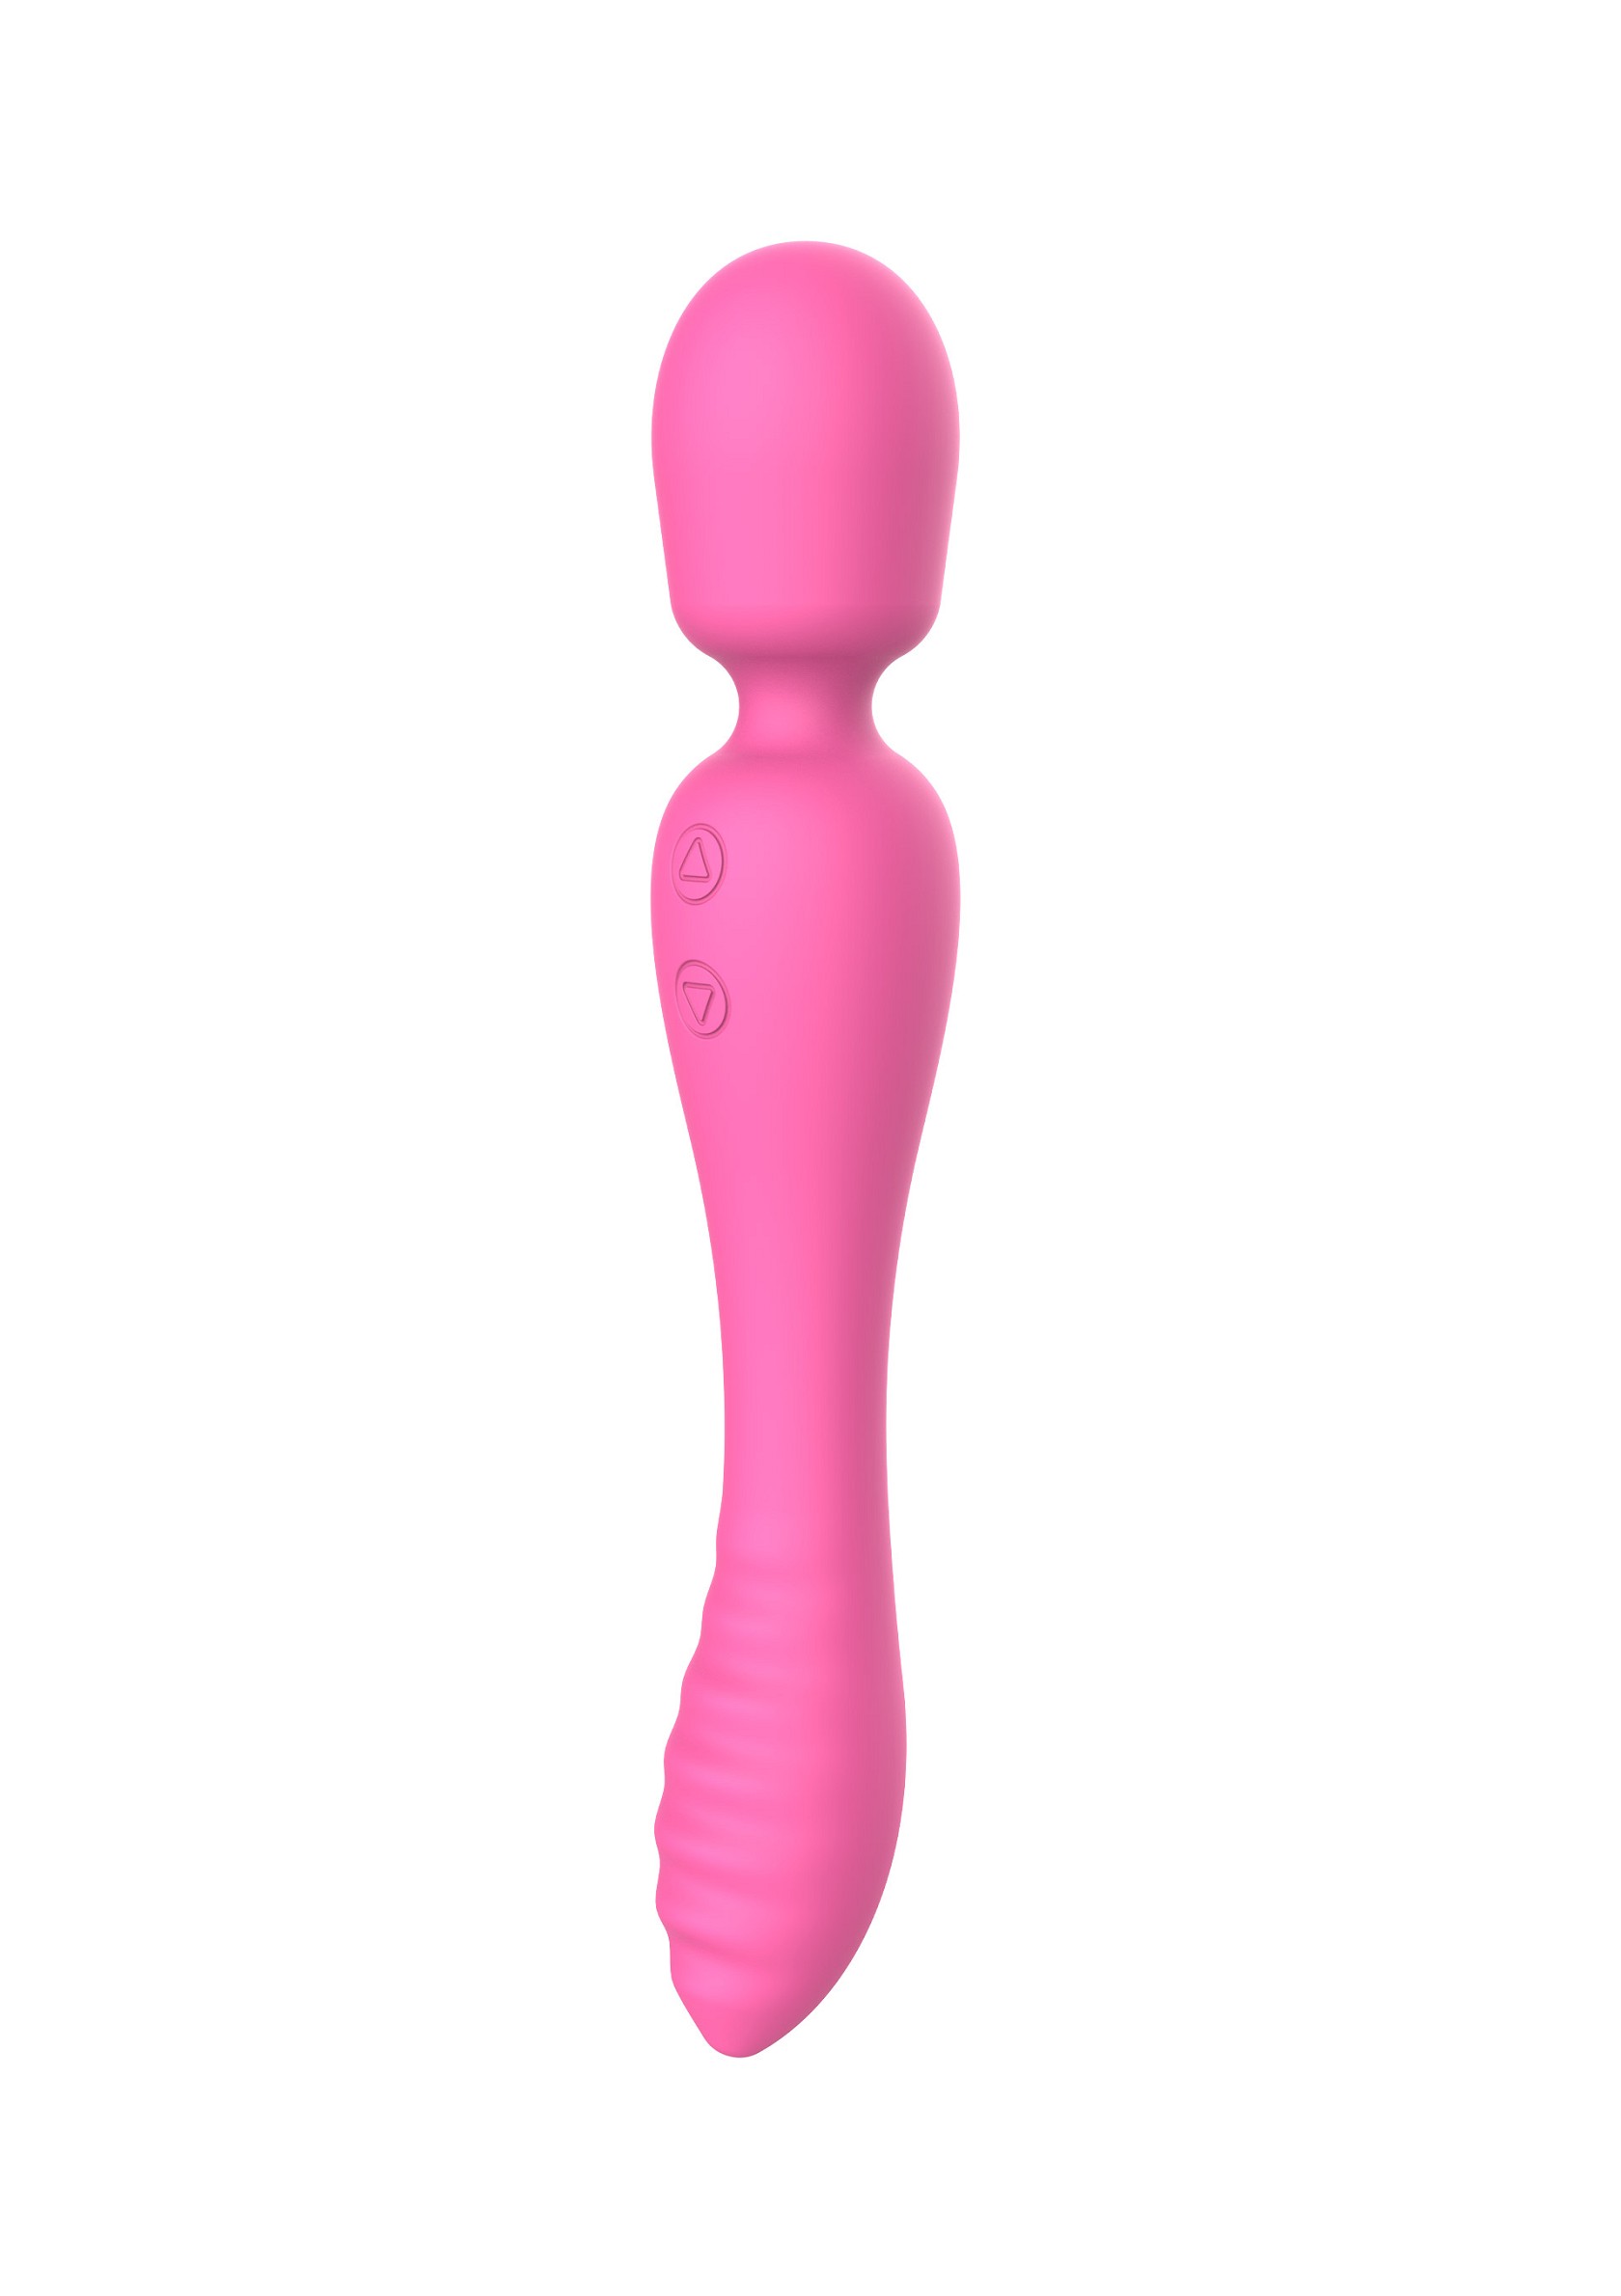 The Evermore 2-in-1 Massager